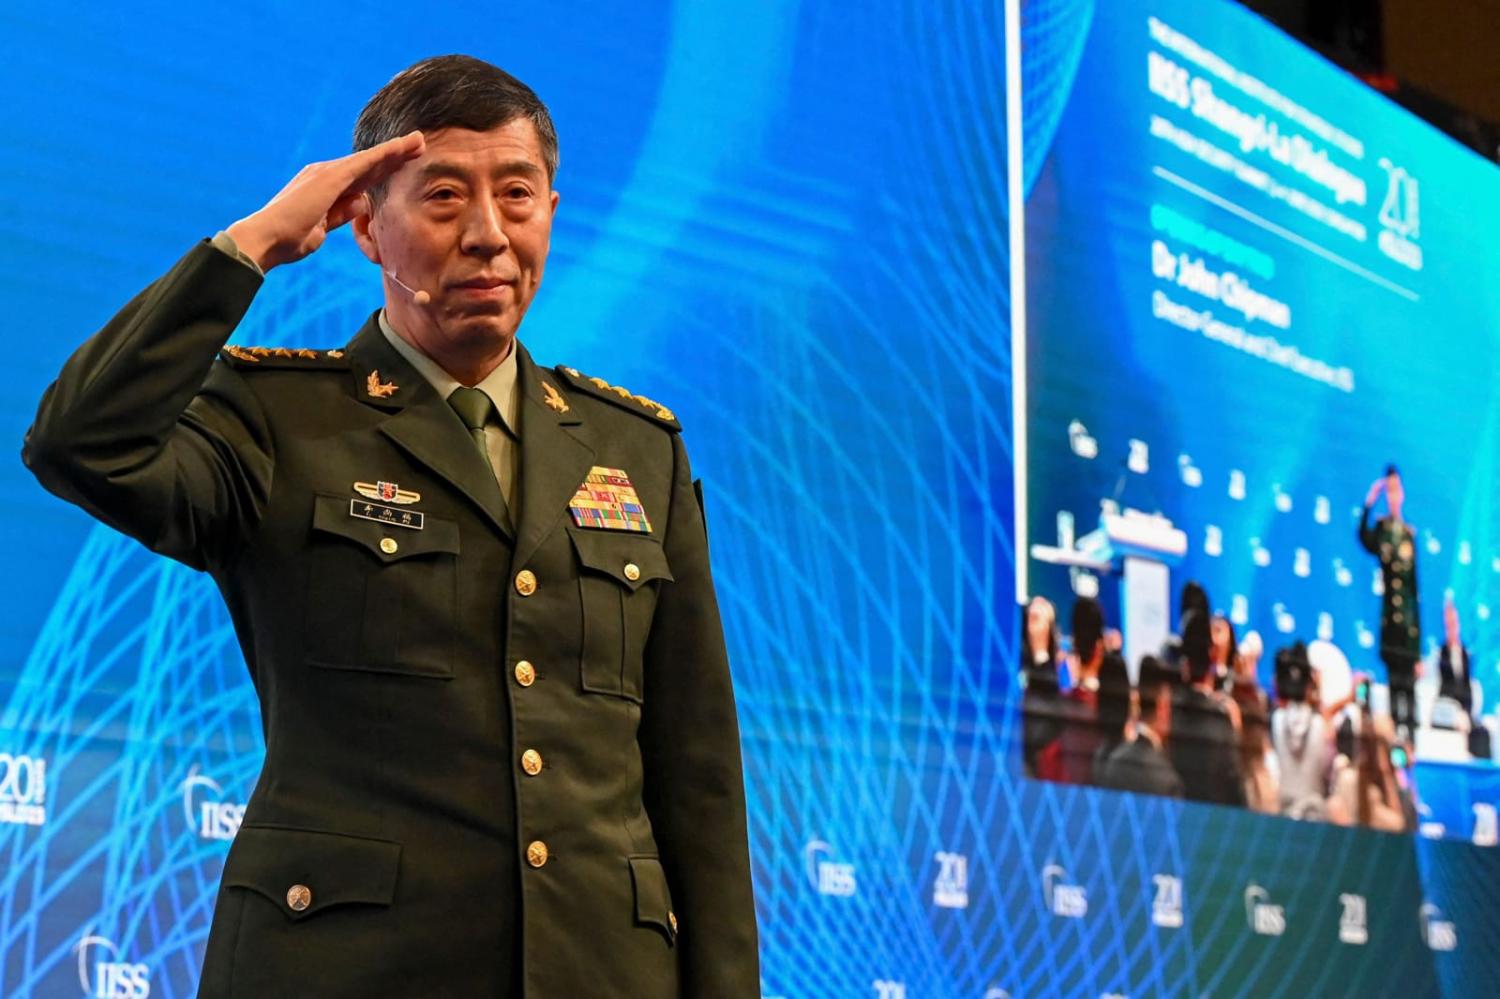 China’s Minister of National Defence Li Shangfu salutes the audience before delivering a speech during the 20th Shangri-La Dialogue summit in Singapore on 4 June (Roslan Rahman/AFP via Getty Images)